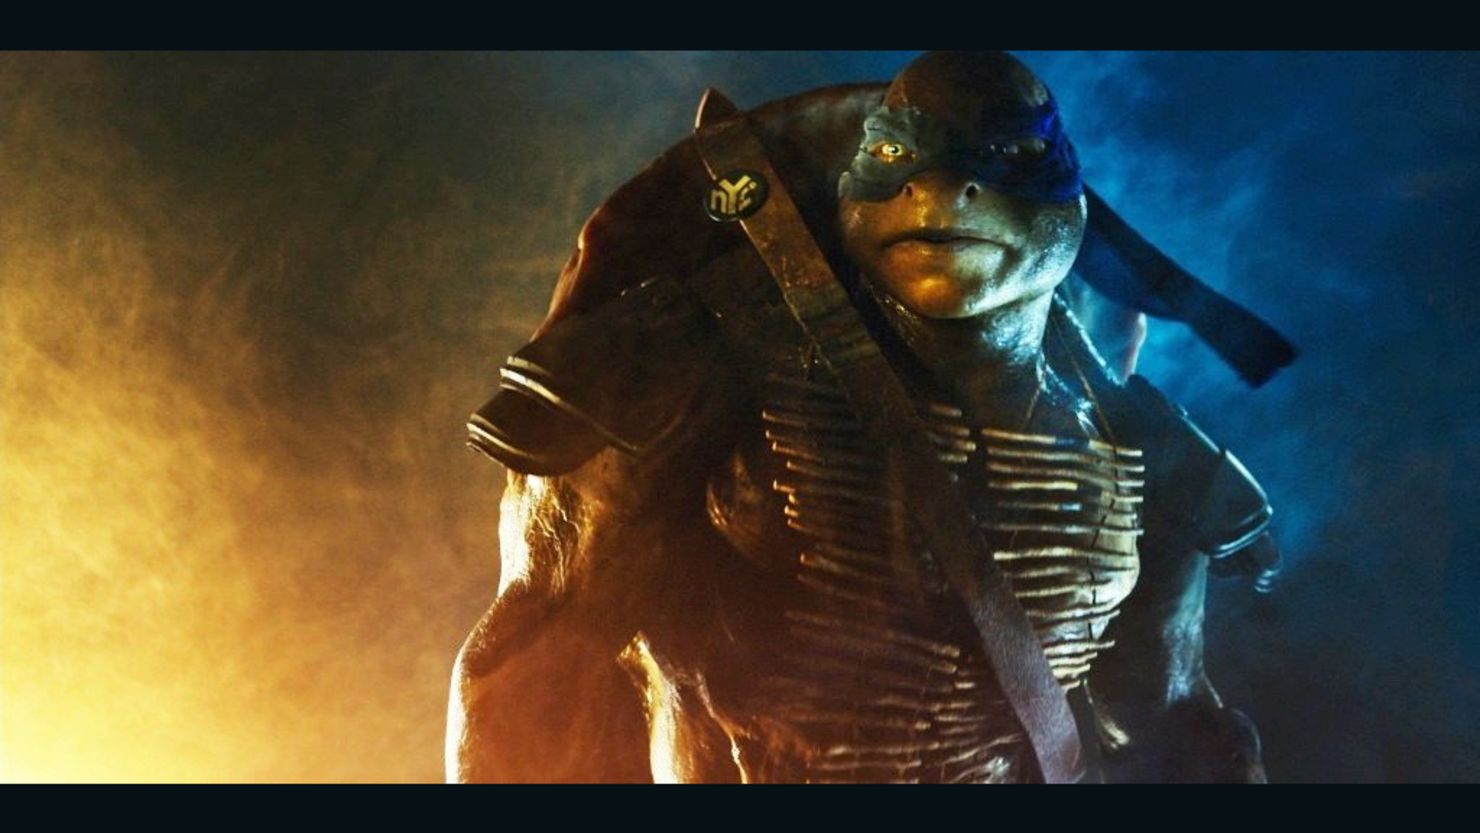 The new "Teenage Mutant Ninja Turtles" movie will have a sequel also produced by Michael Bay.